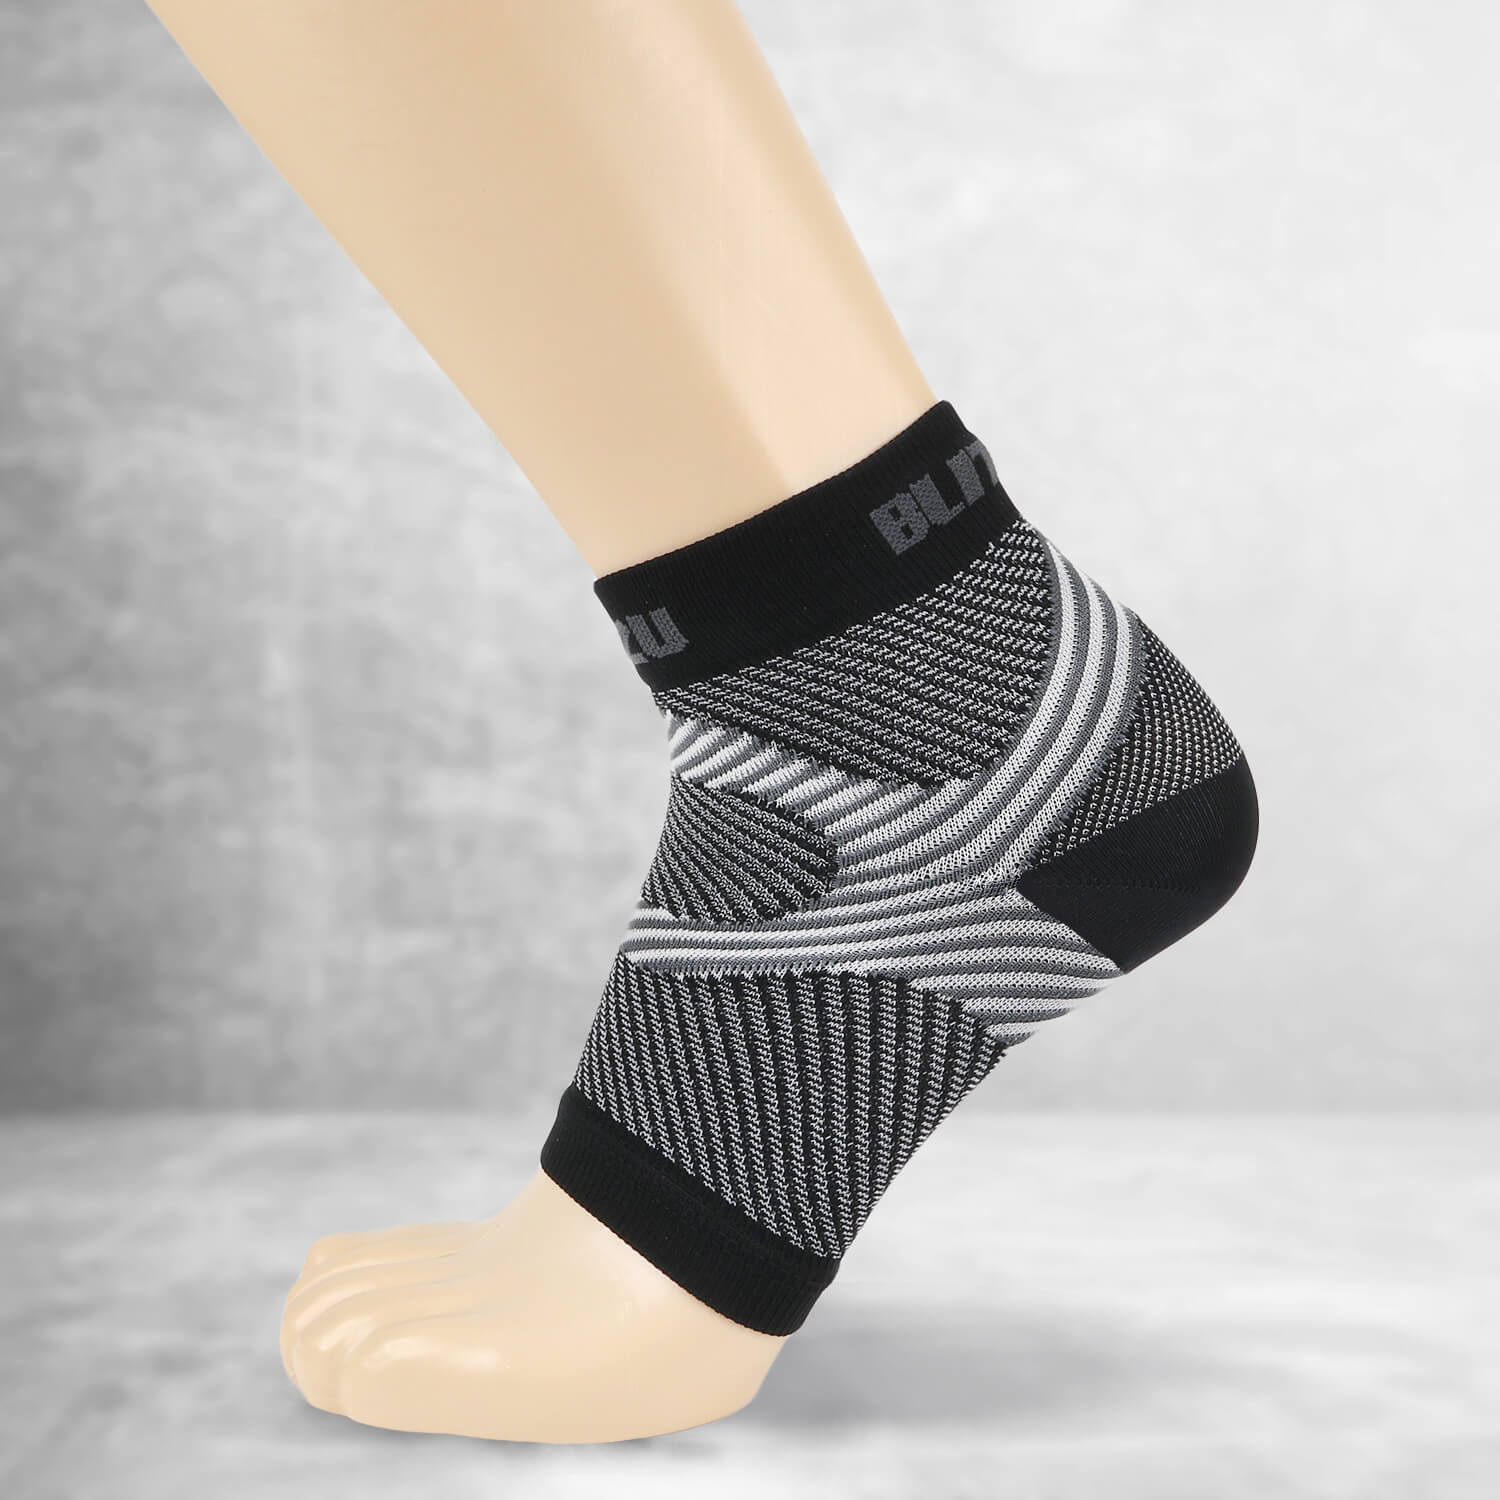 Leg Support Brace Hamstring Quad Thigh High Compression Sleeve Socks Pain  Relief 